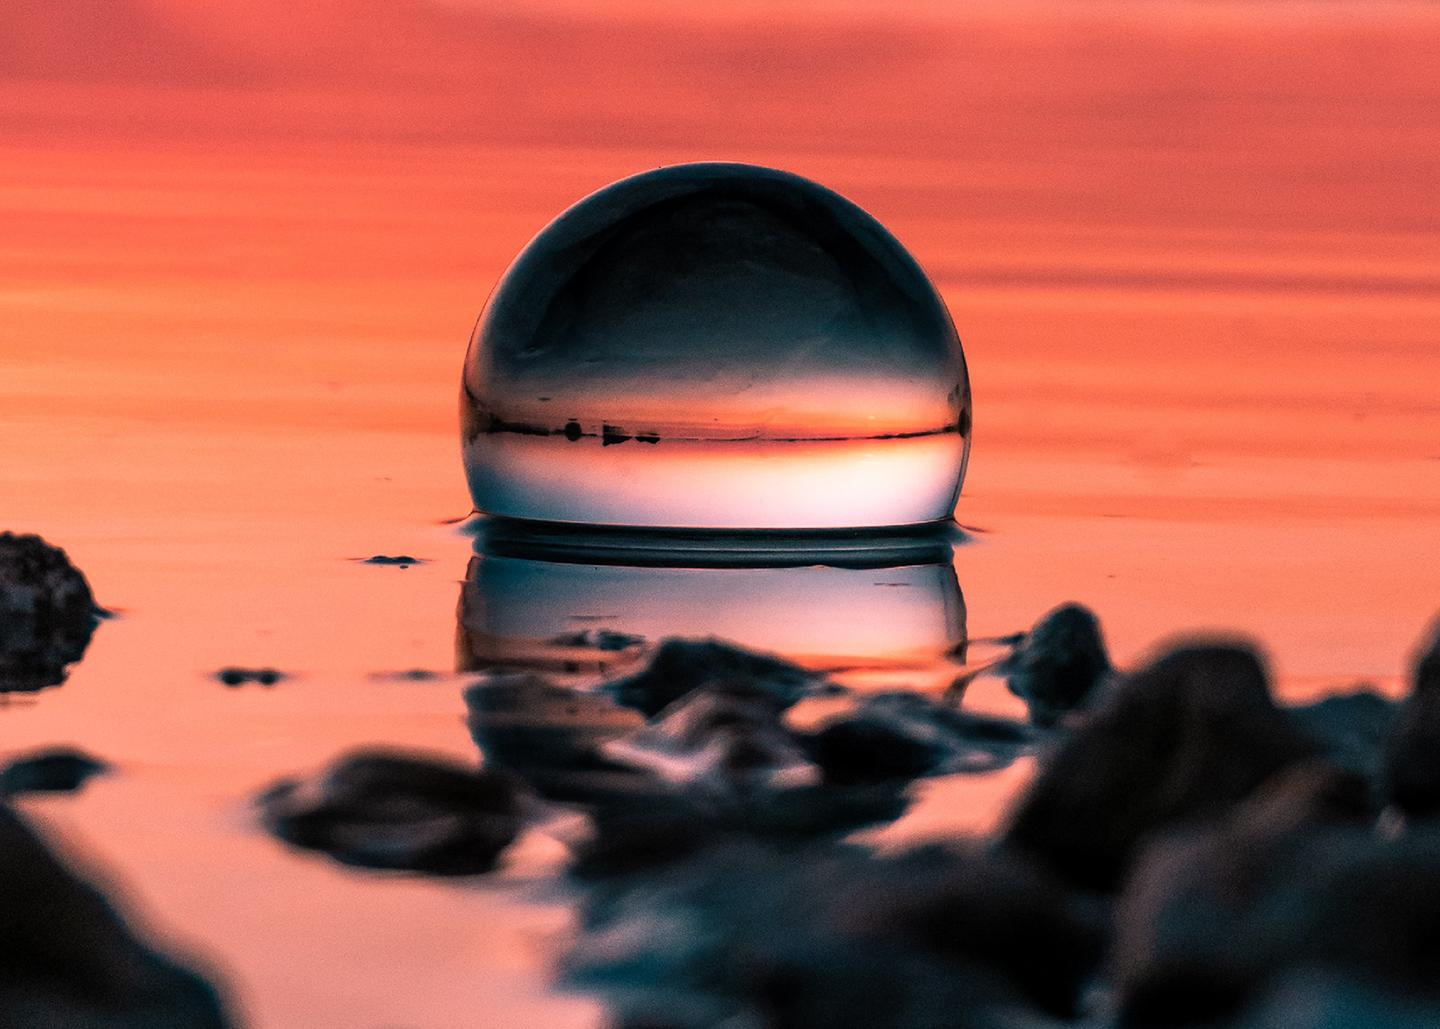 Glass sphere in water at sunset